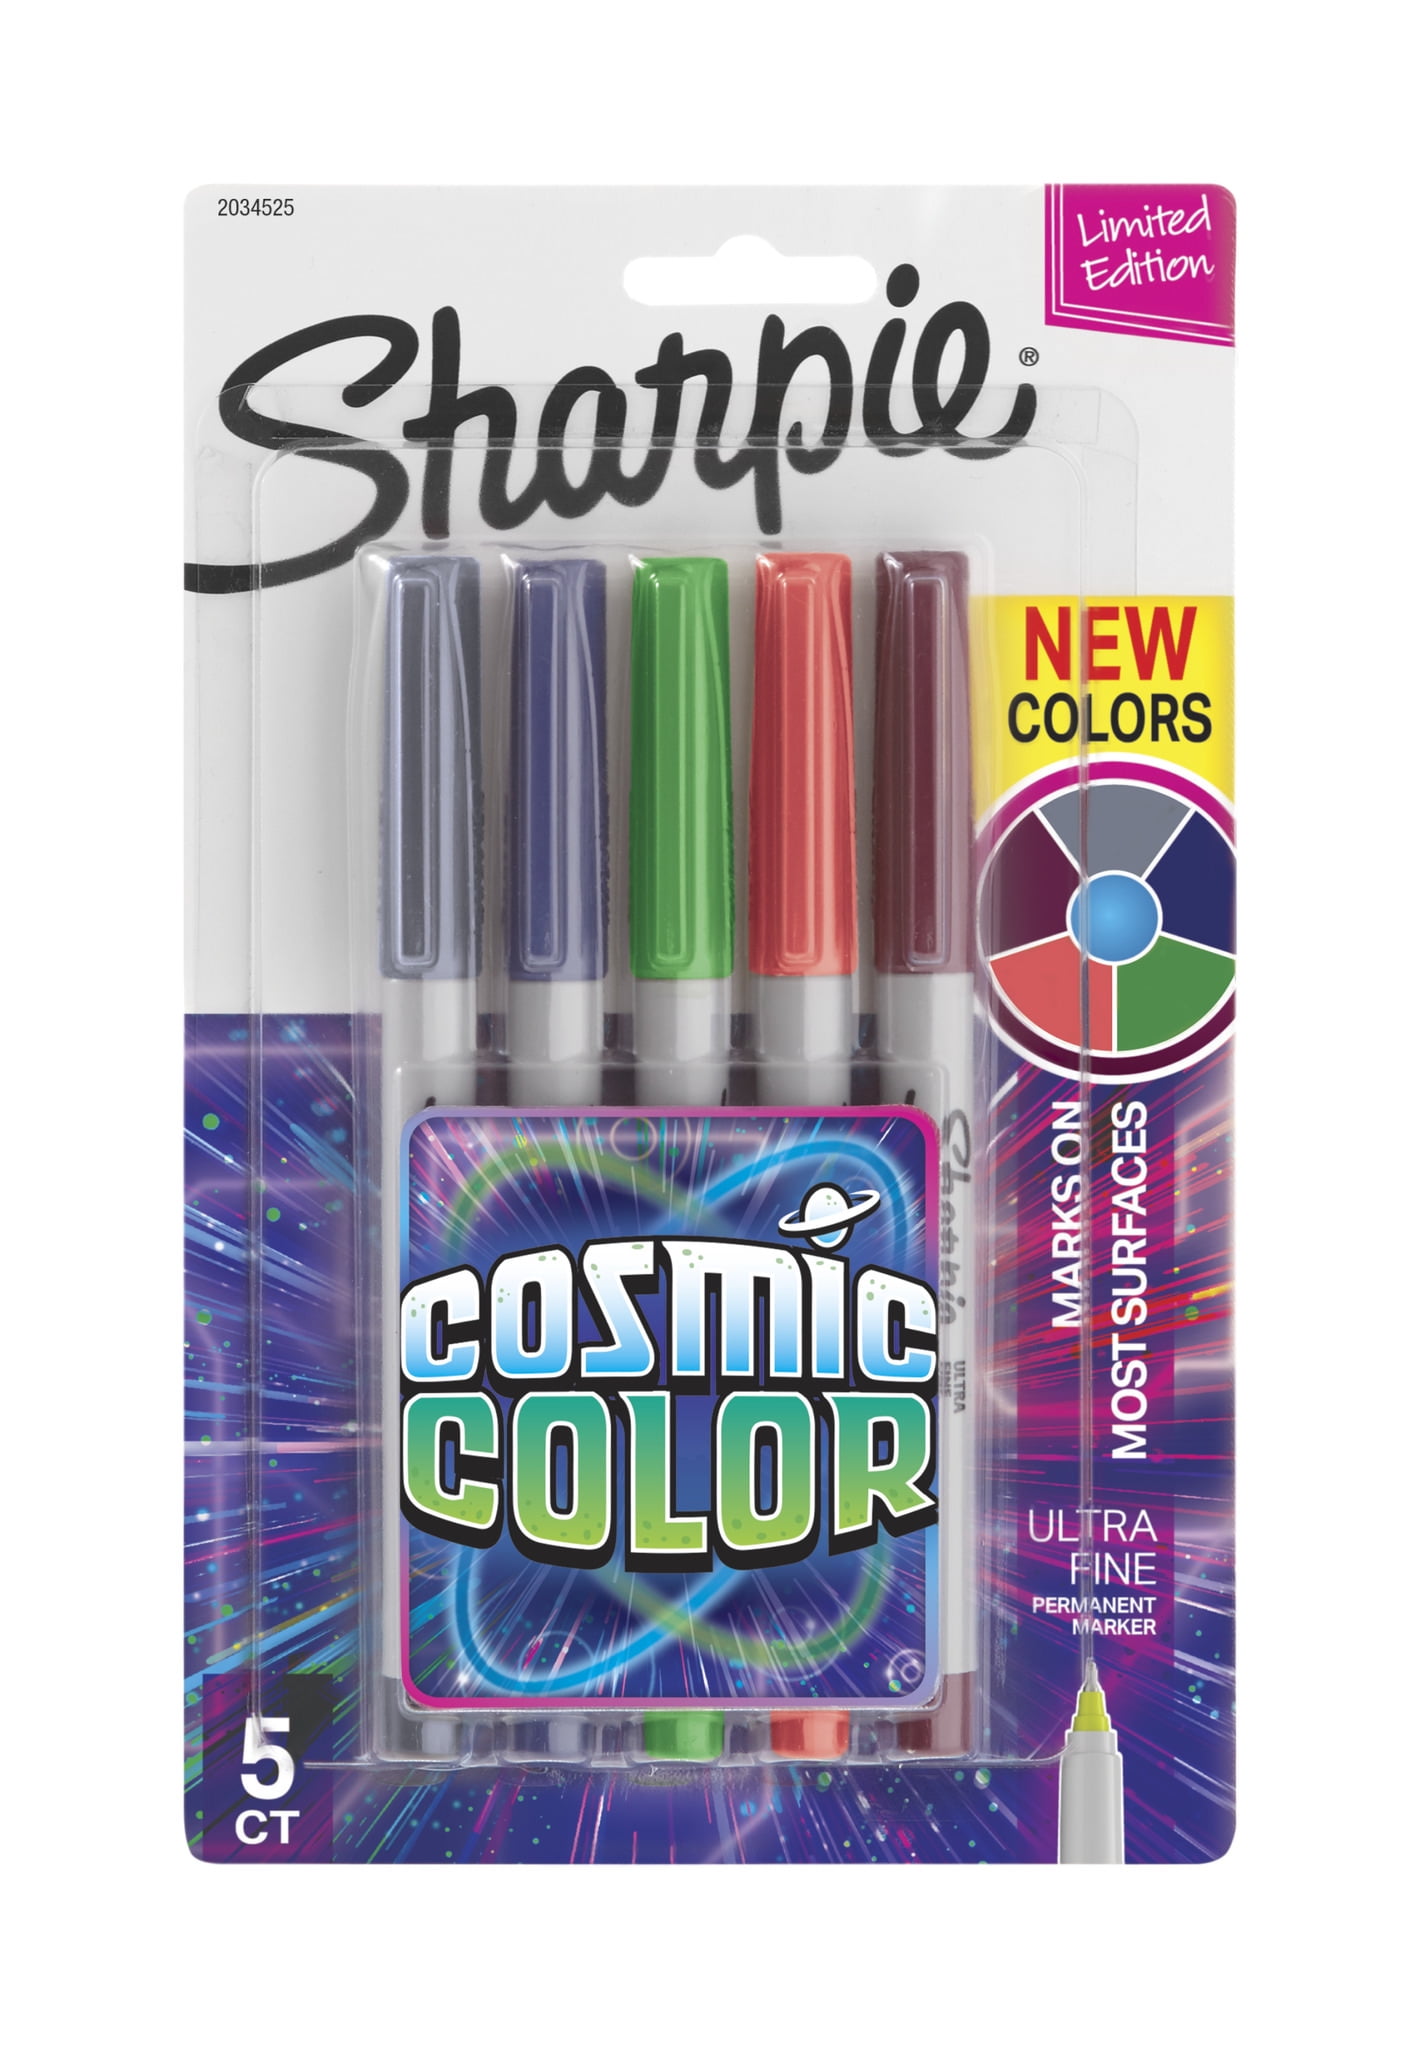 Sharpie Cosmic Color Ultra Fine Point Markers 5 CT Limited Edition permanent 71641140776 